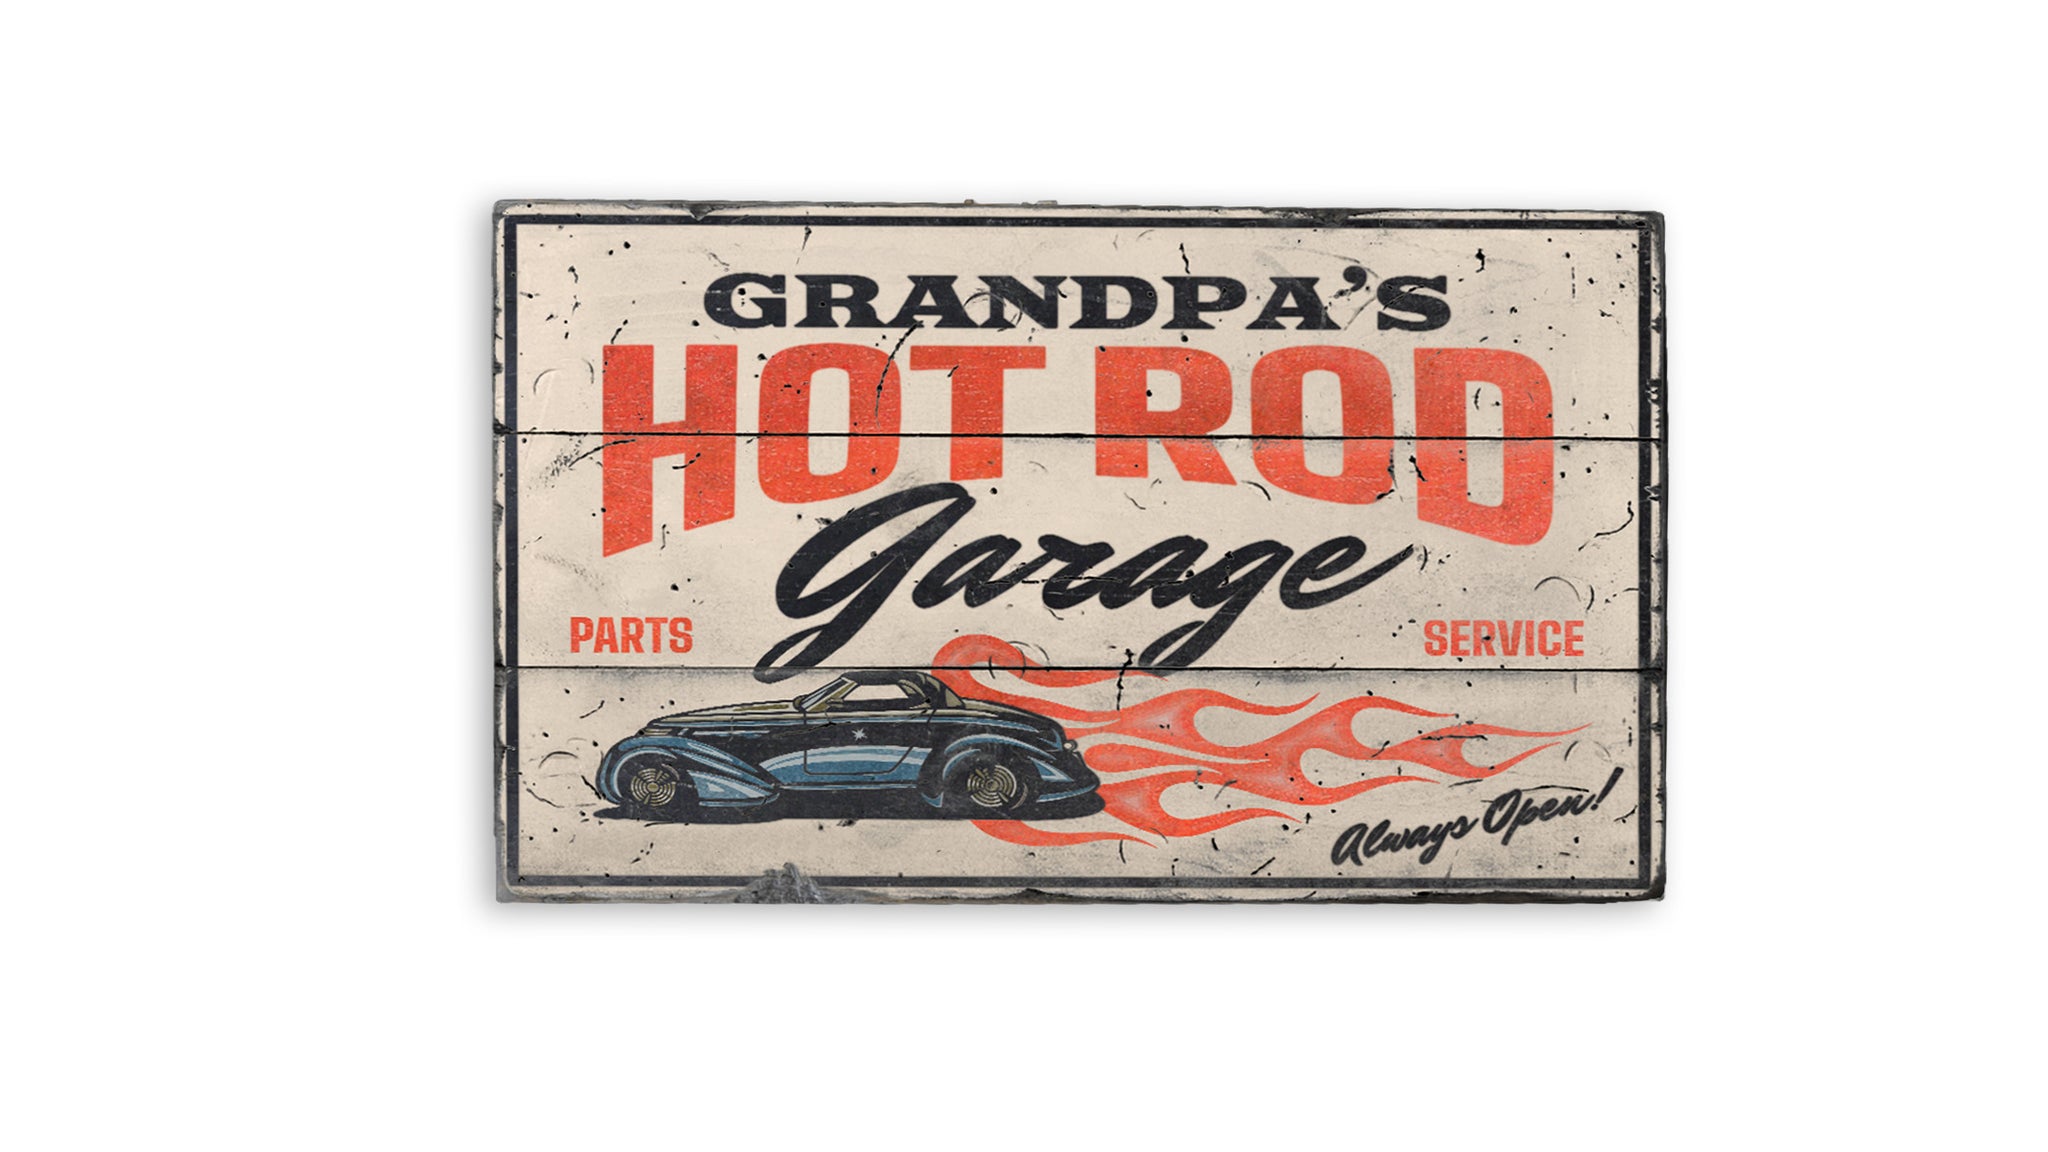 Hot Rod Garage Always Open Parts and Service Rustic Wood Sign